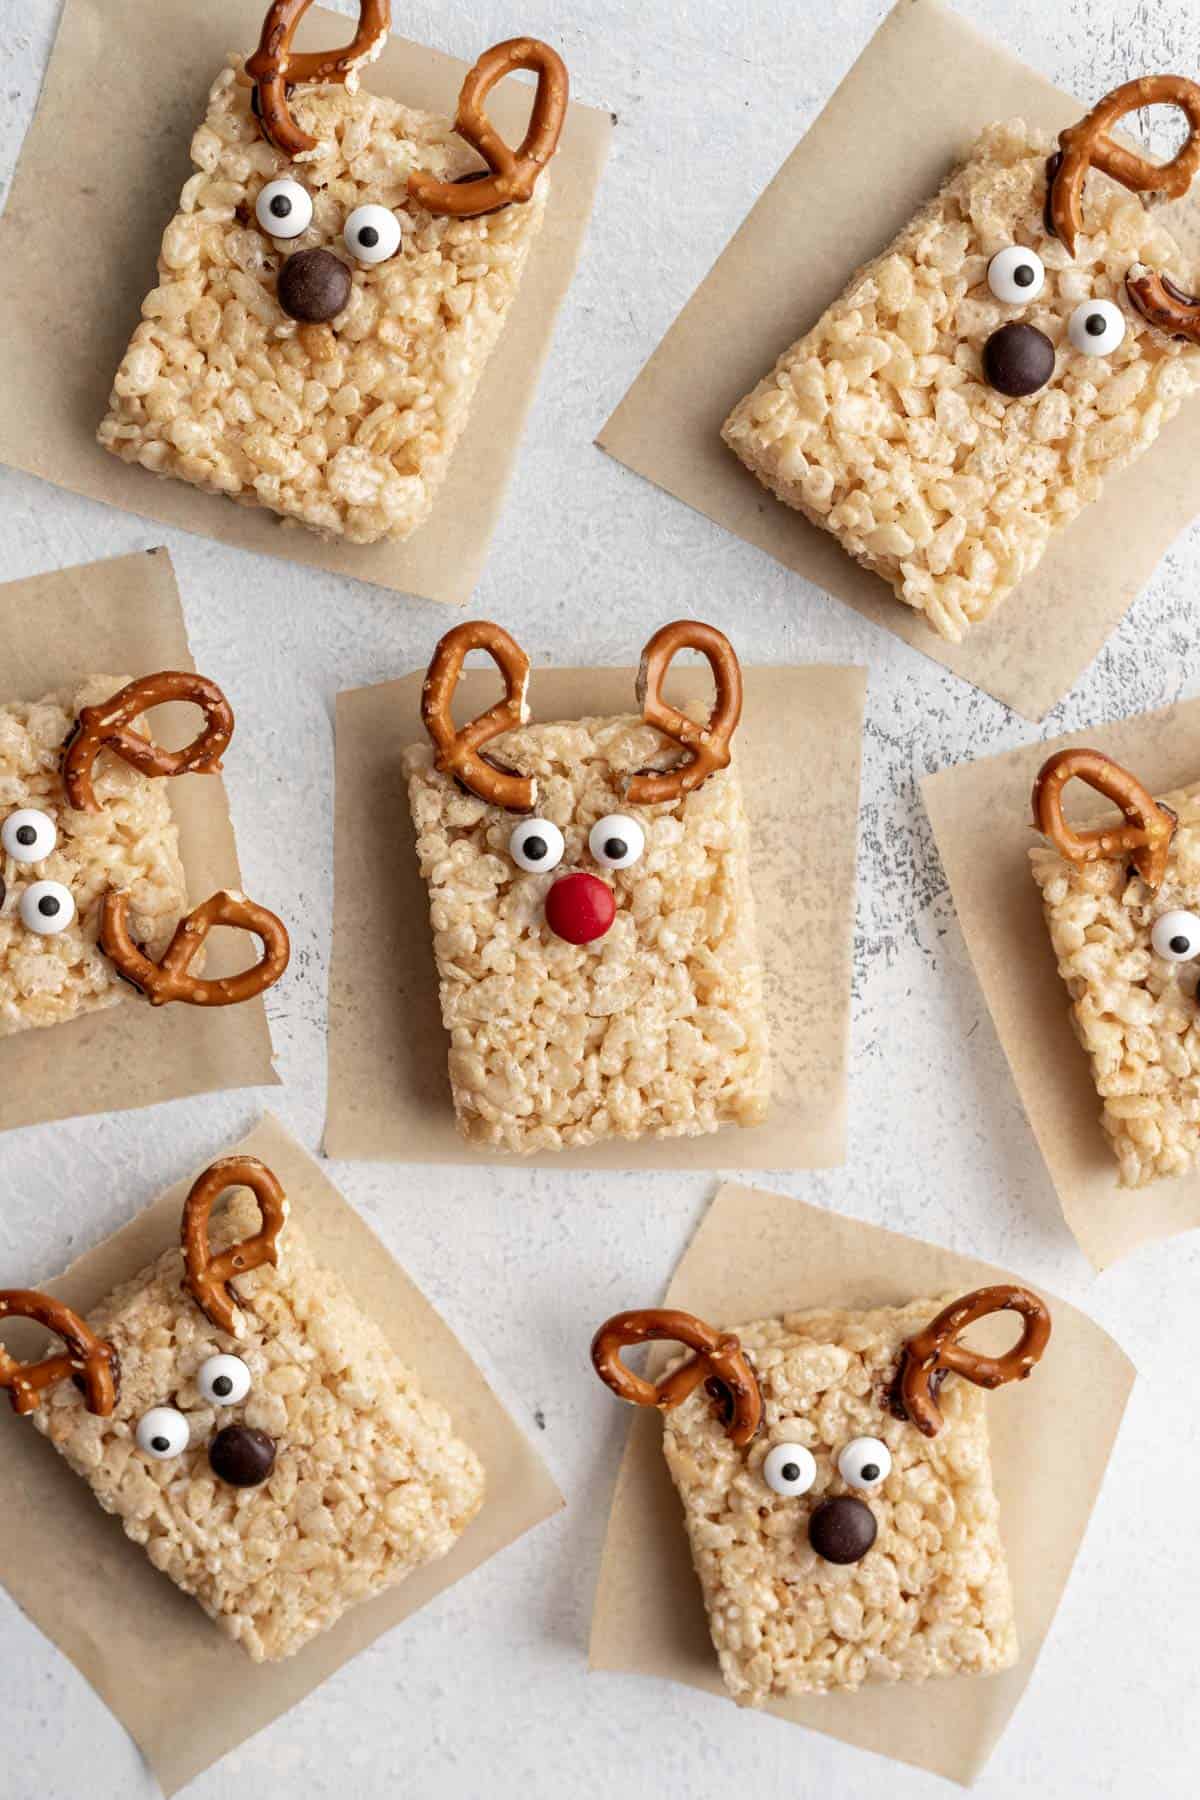 Reindeer rice krispie treats arranged on parchment paper with pretzel antlers, candy eyes, and a red or brown candy nose.